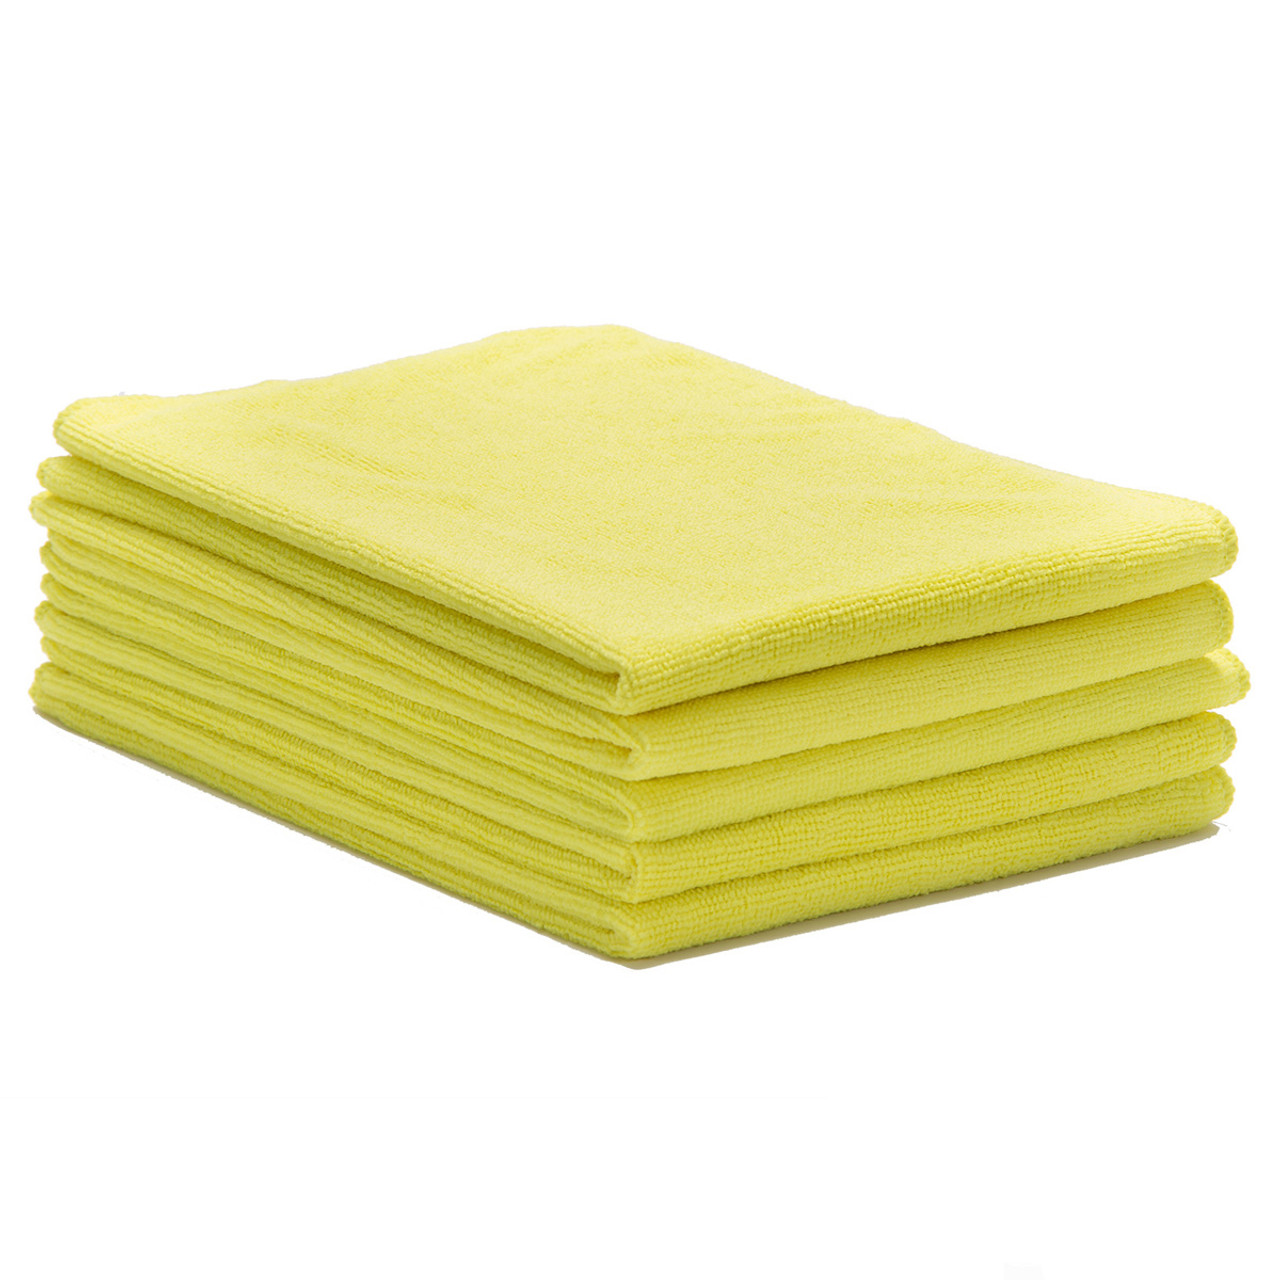 Kitchen Towels, Pack of 12 Bar Mop Towels -16X19 Inches -100